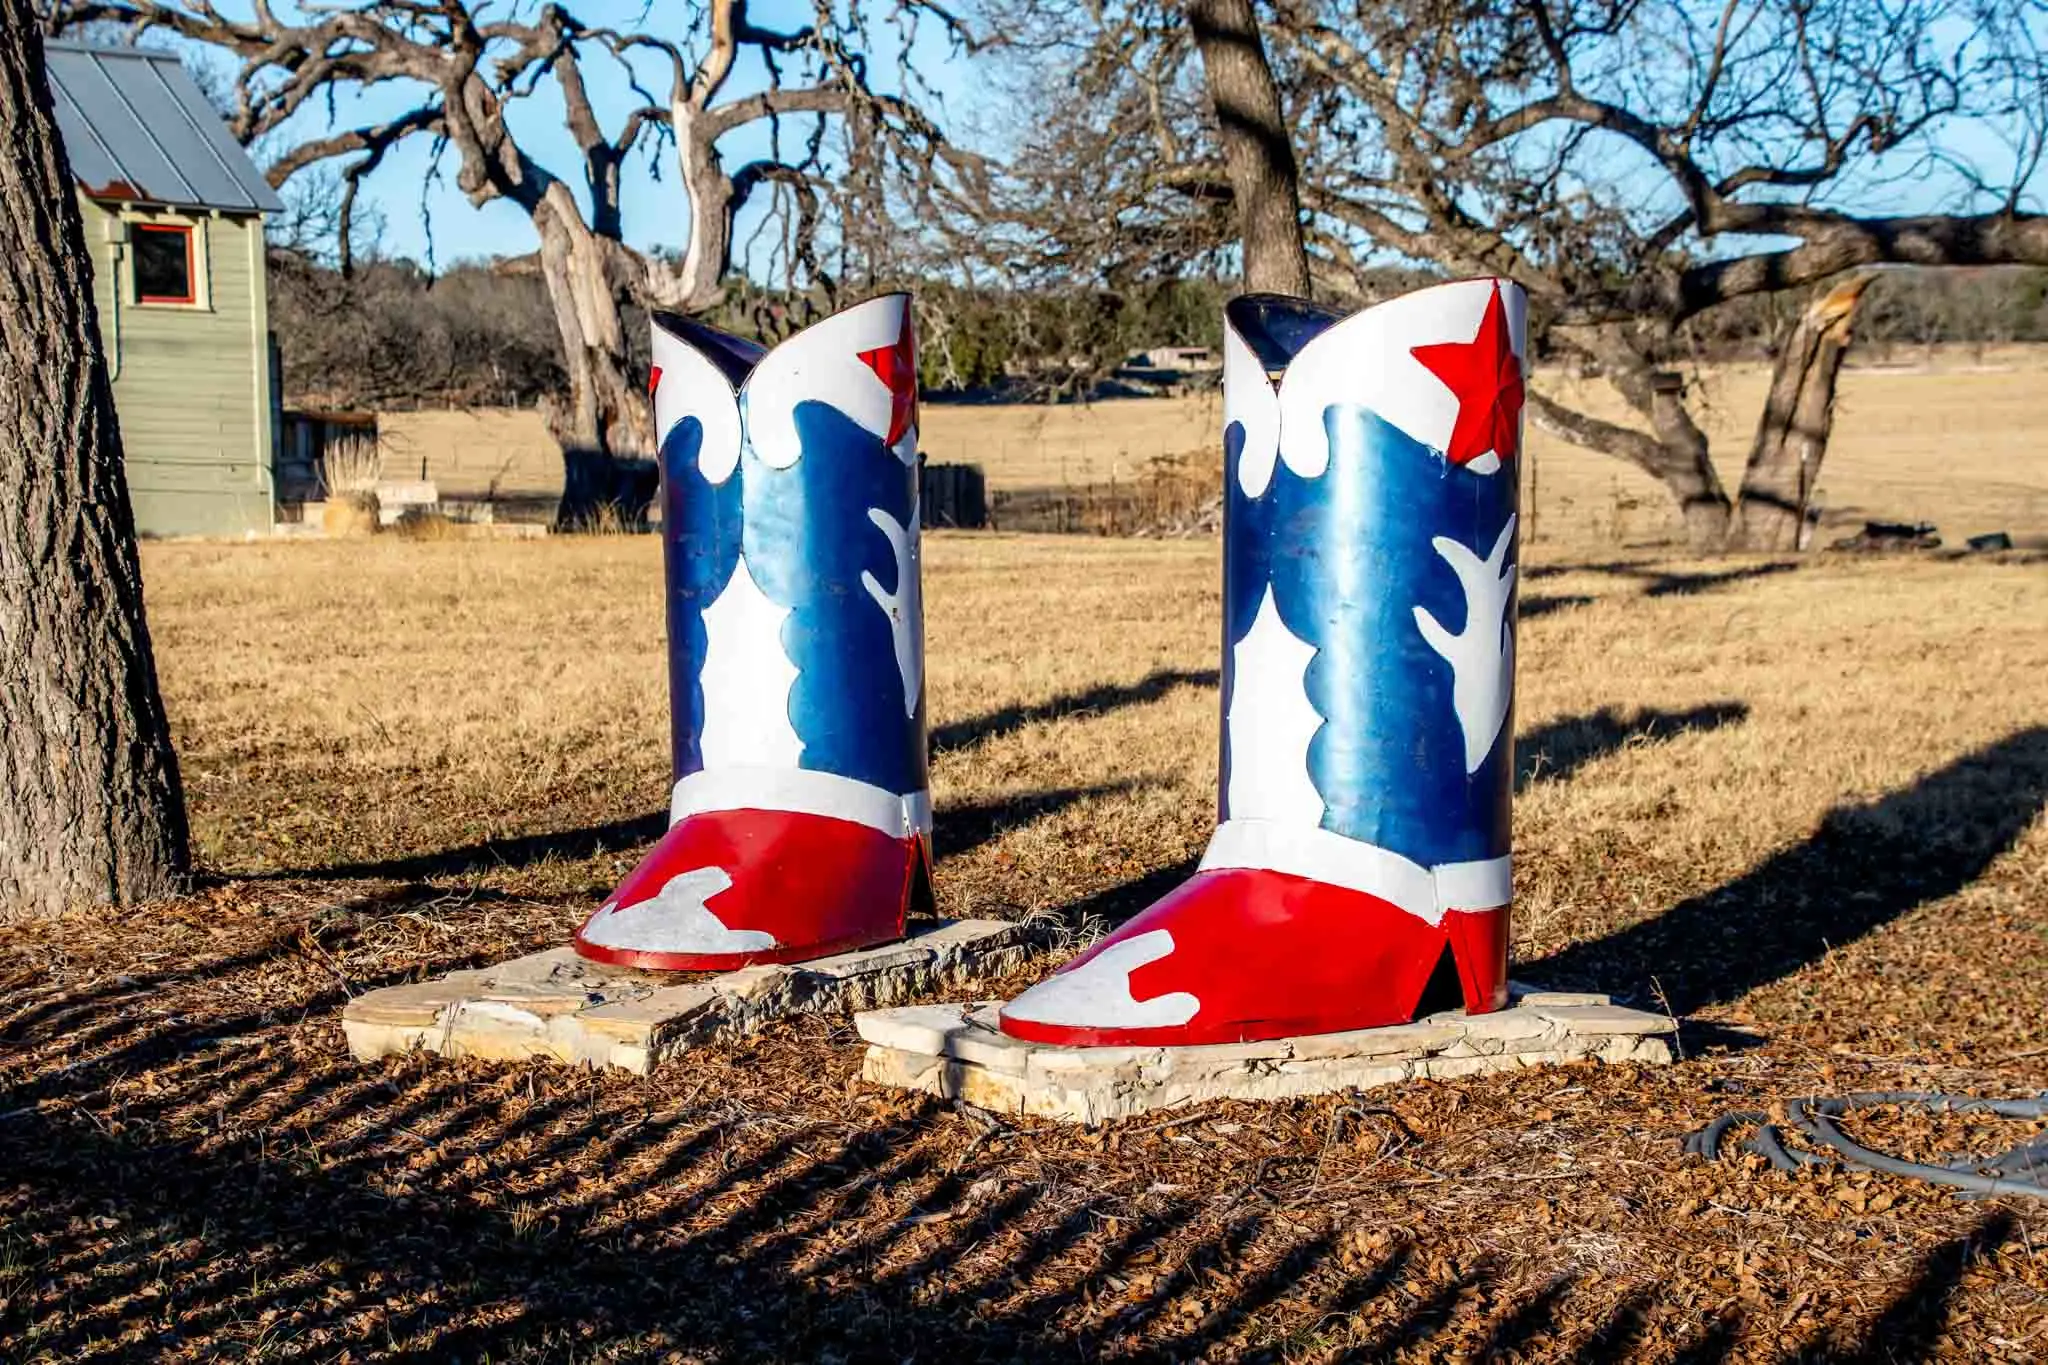 Large red, white, and blue cowboy boots